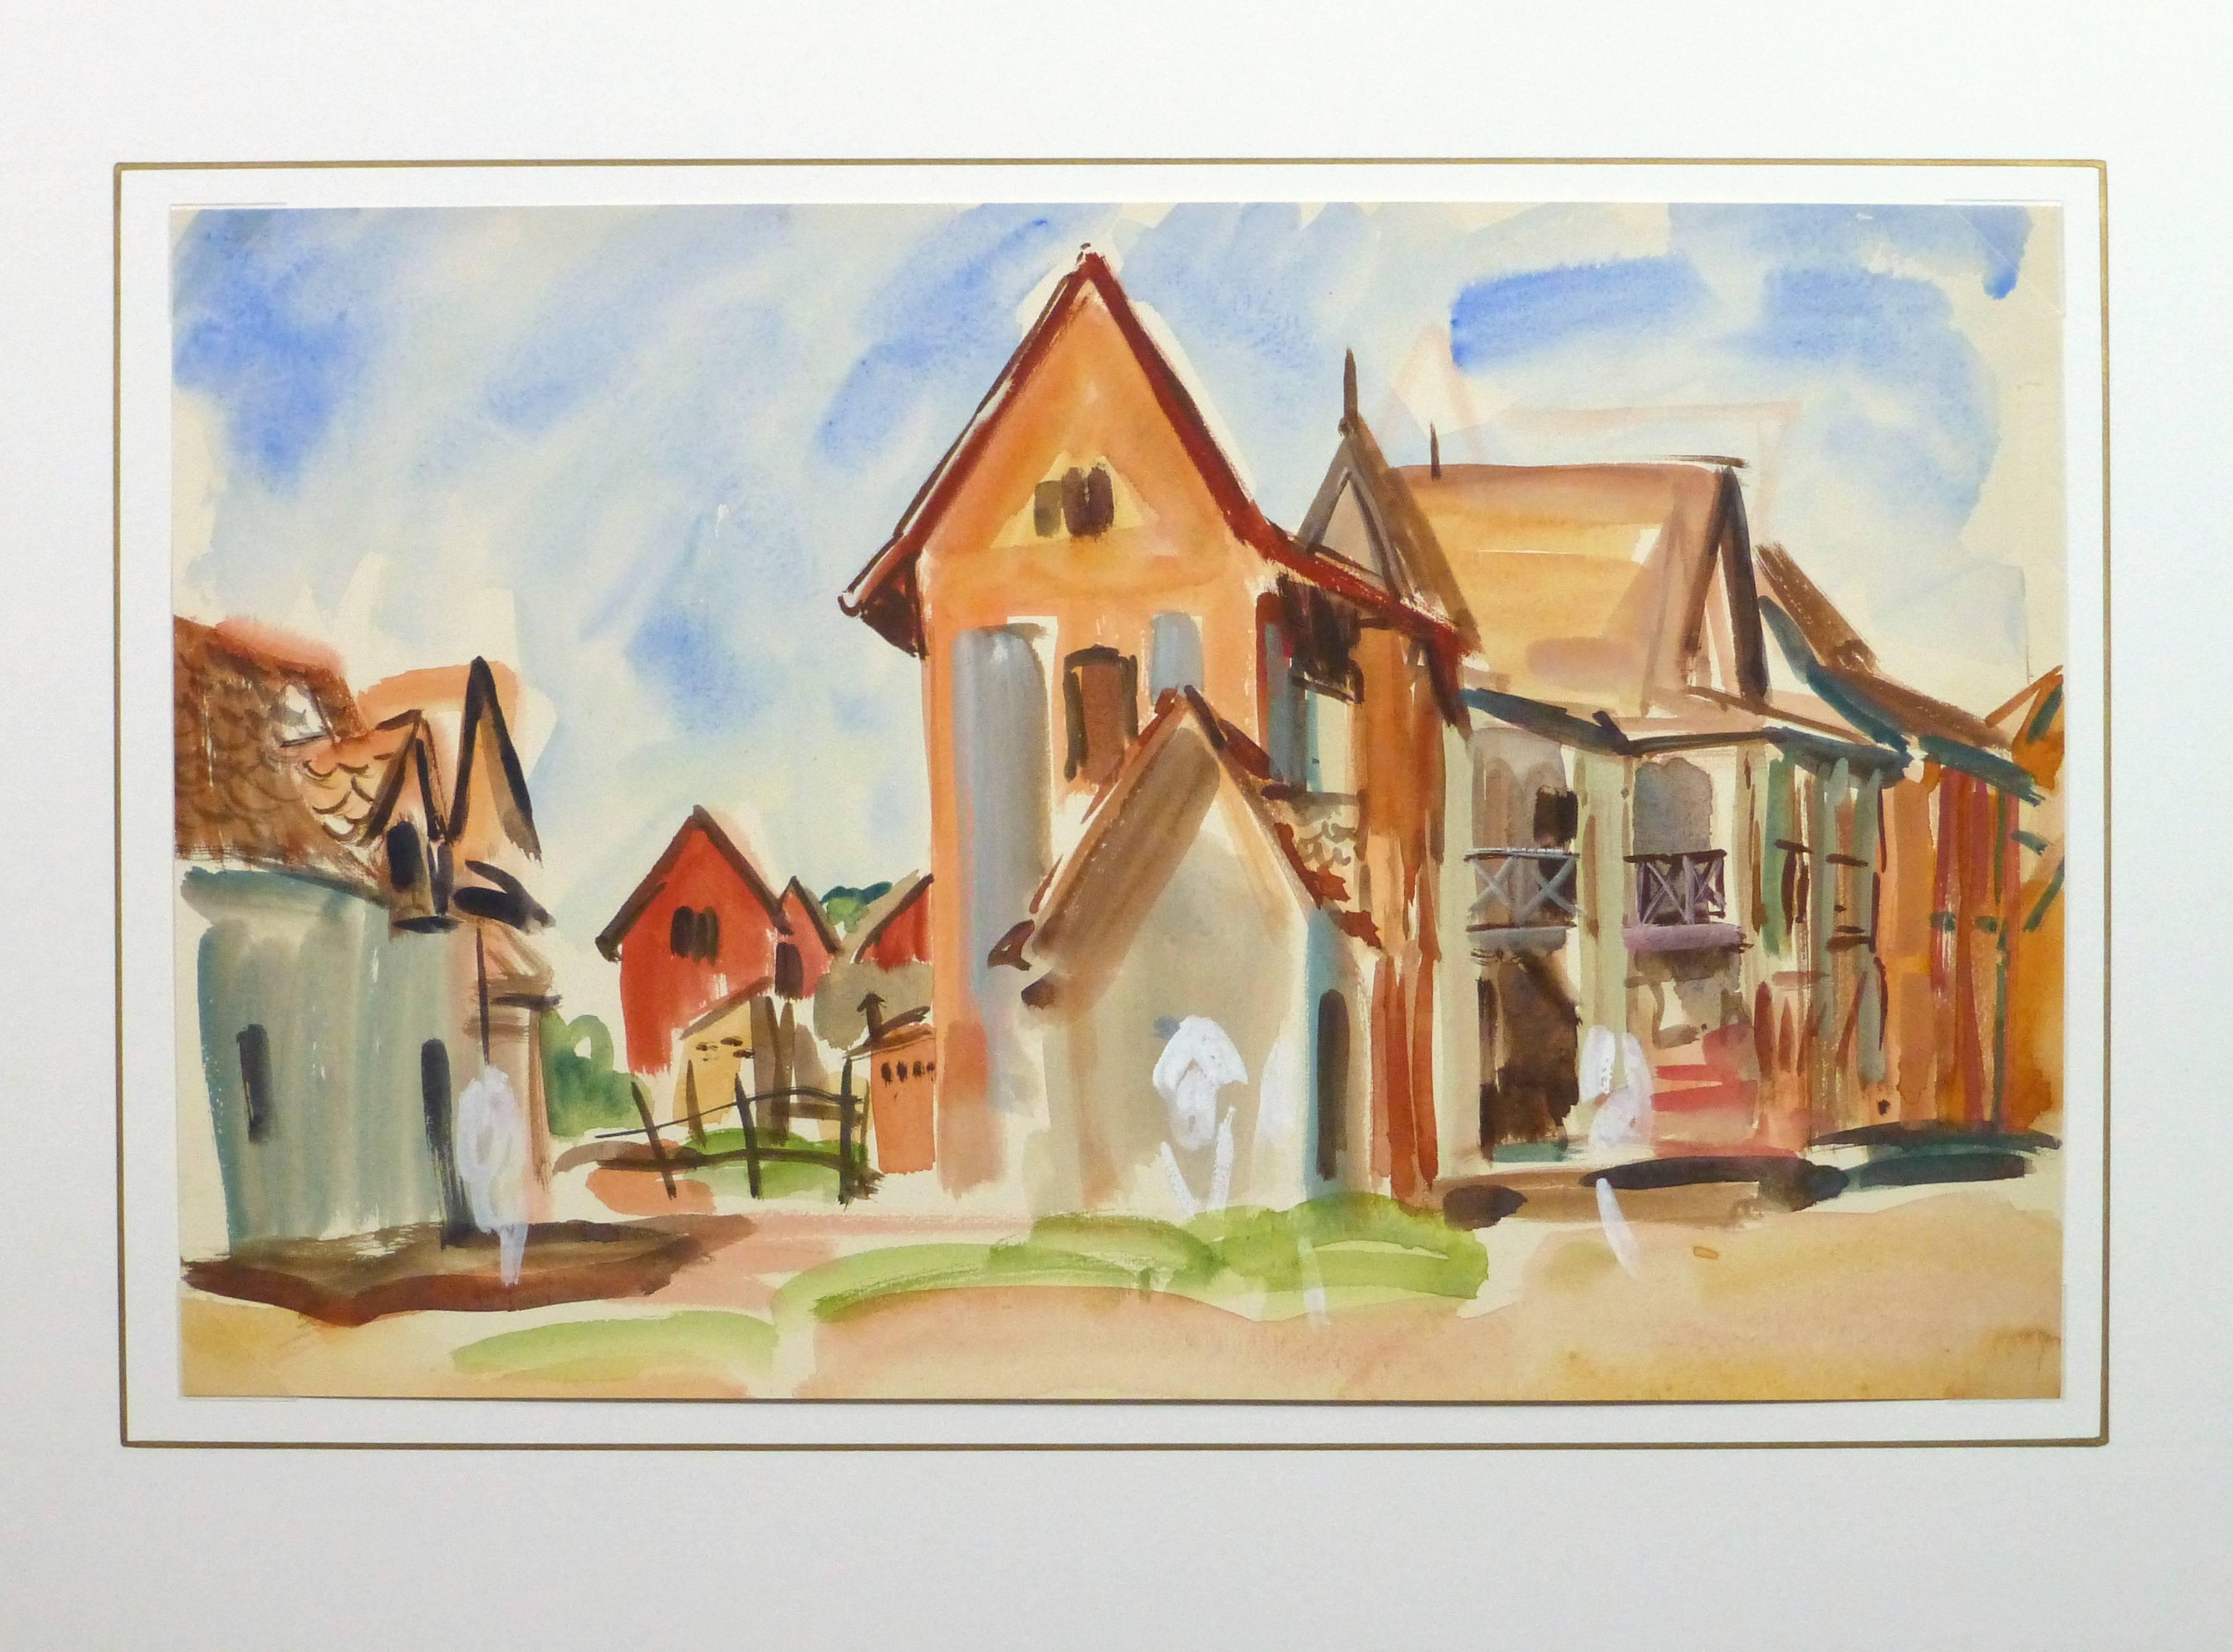 Sunny and bright watercolor of a section of buildings in an island town of Madagascar by French artist Stephane Magnard, circa 1950. 

Original artwork on paper displayed on a white mat with a gold border. Archival plastic sleeve and Certificate